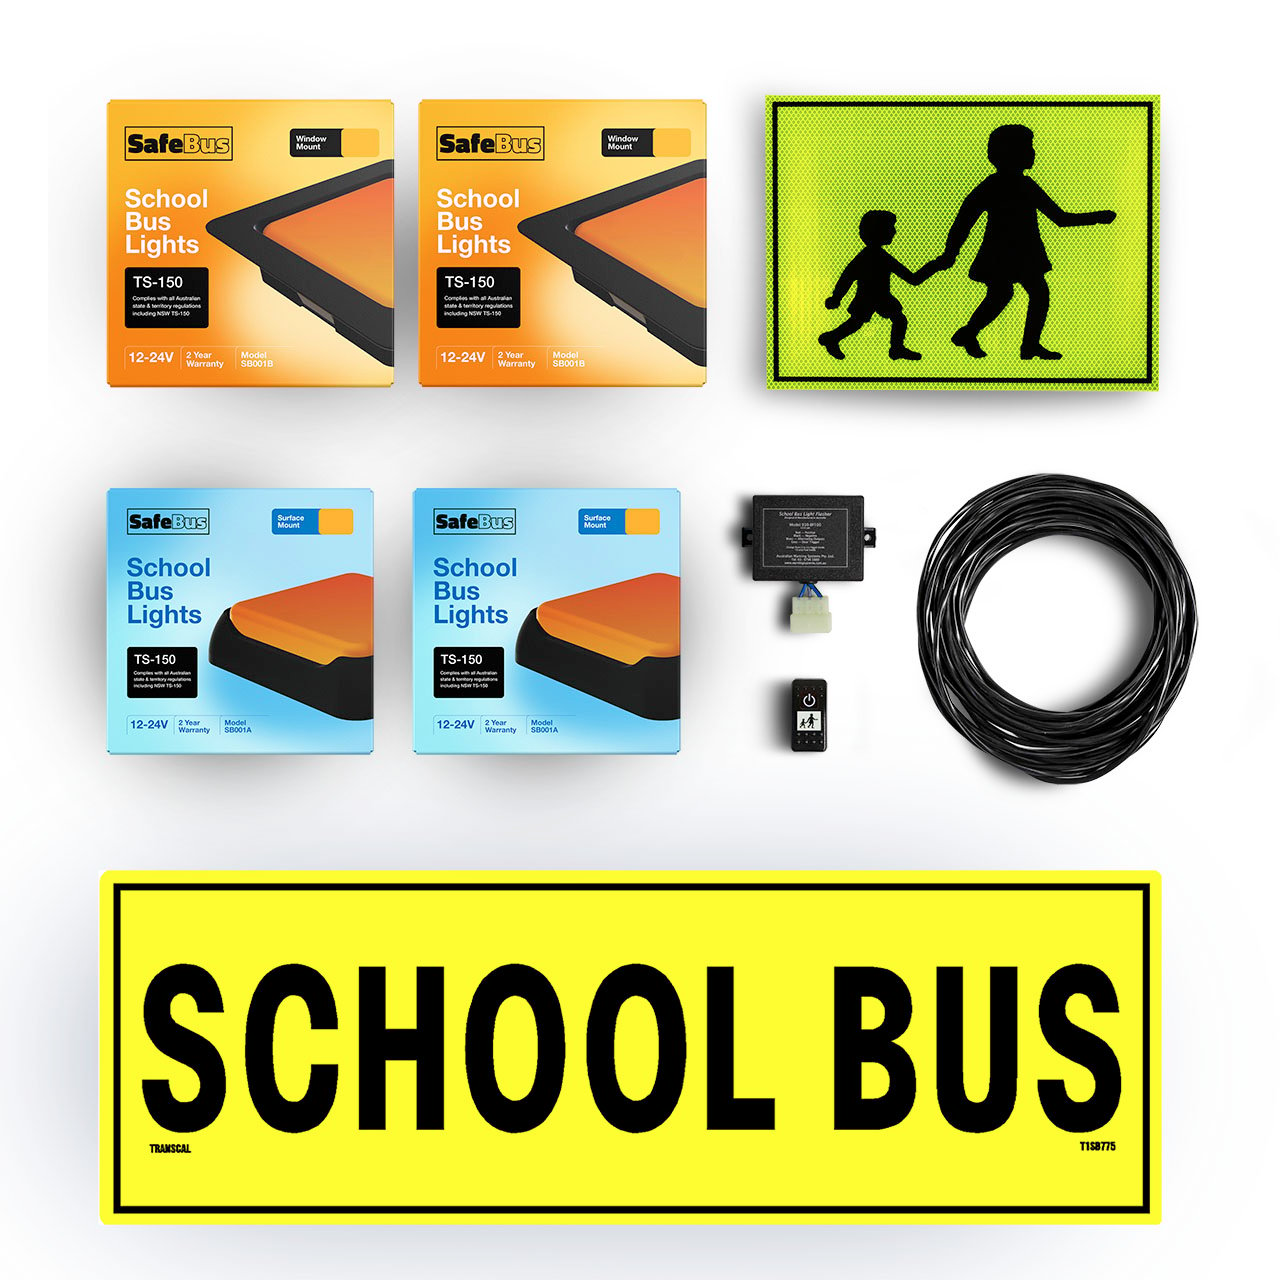 Image of the contents of the Queensland school bus light exterior mount kit for Toyota HiAce Commuter buses, including school bus signage, front amber school bus lights in a white mount, rear surface mount school bus lights, flasher unit, switch and wiring loom